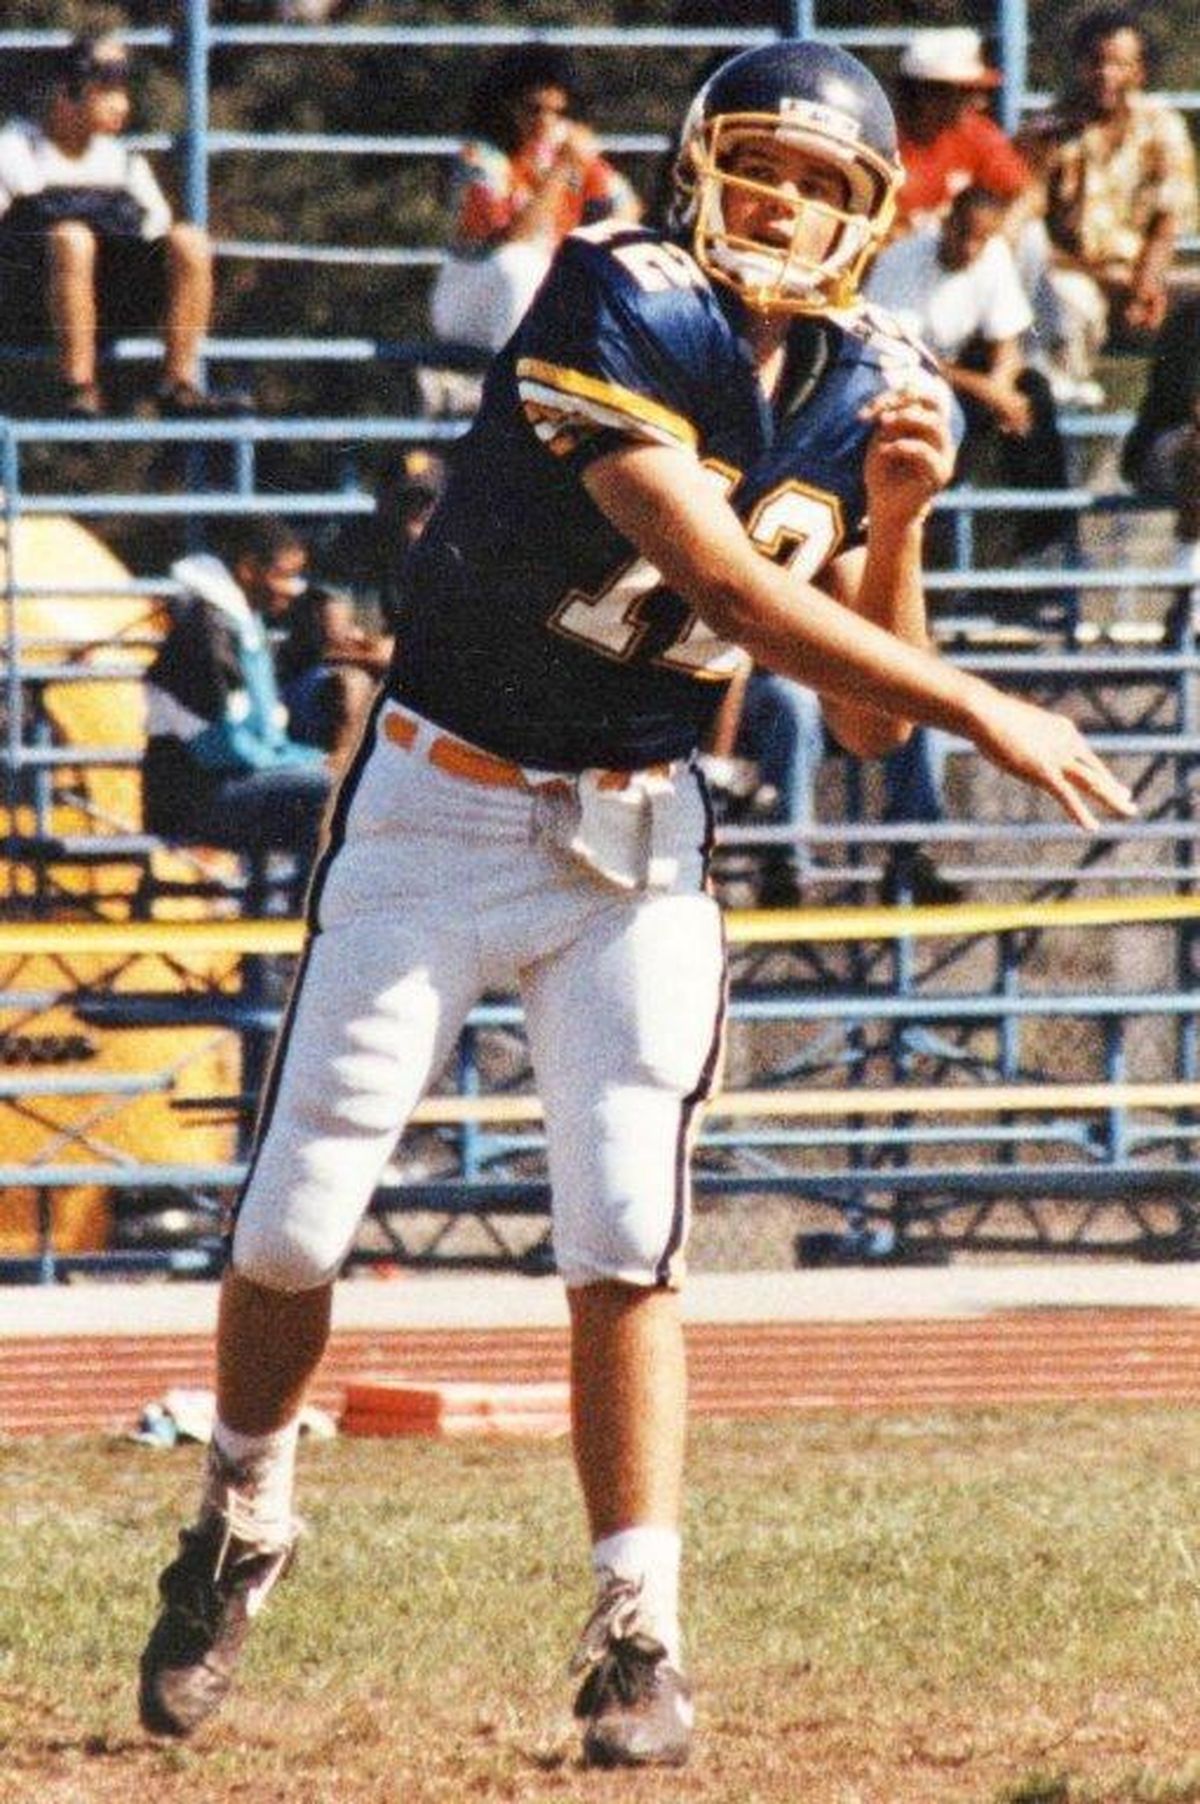 More than 20 years before Leki Nunn became the starting quarterback at Junipero Serra High School, a guy byt the name of Tom Brady was throwing pases for the Padres. (Junipero Serra High / Courtesy)